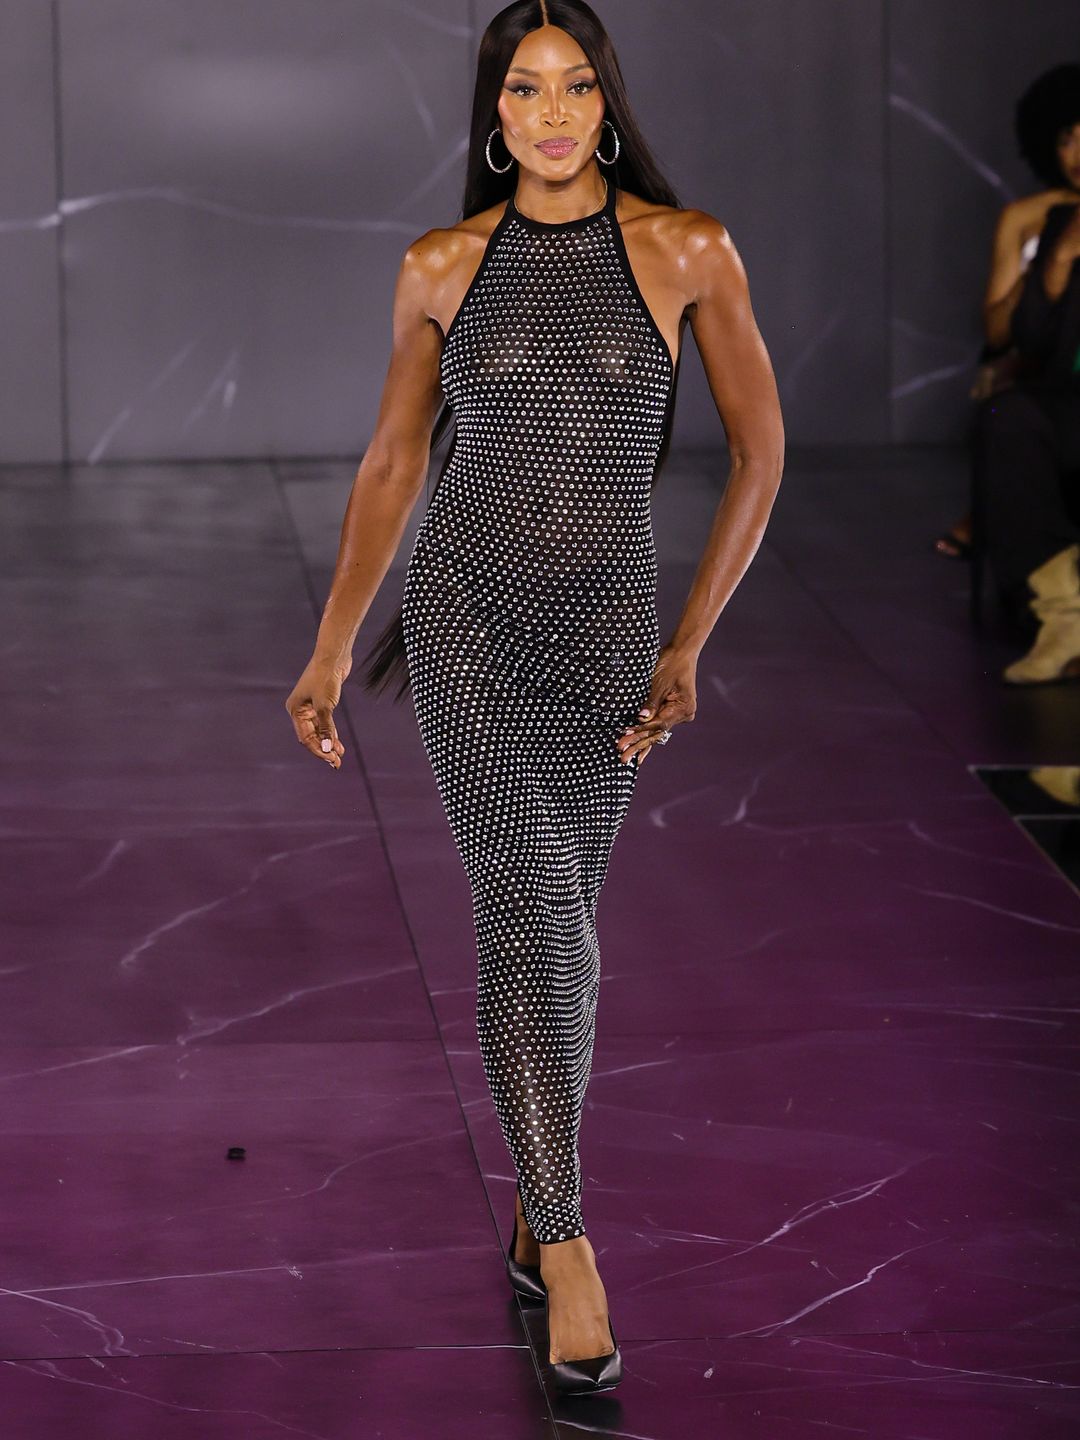 Naomi Campbell wearing a halter dress on the runway 